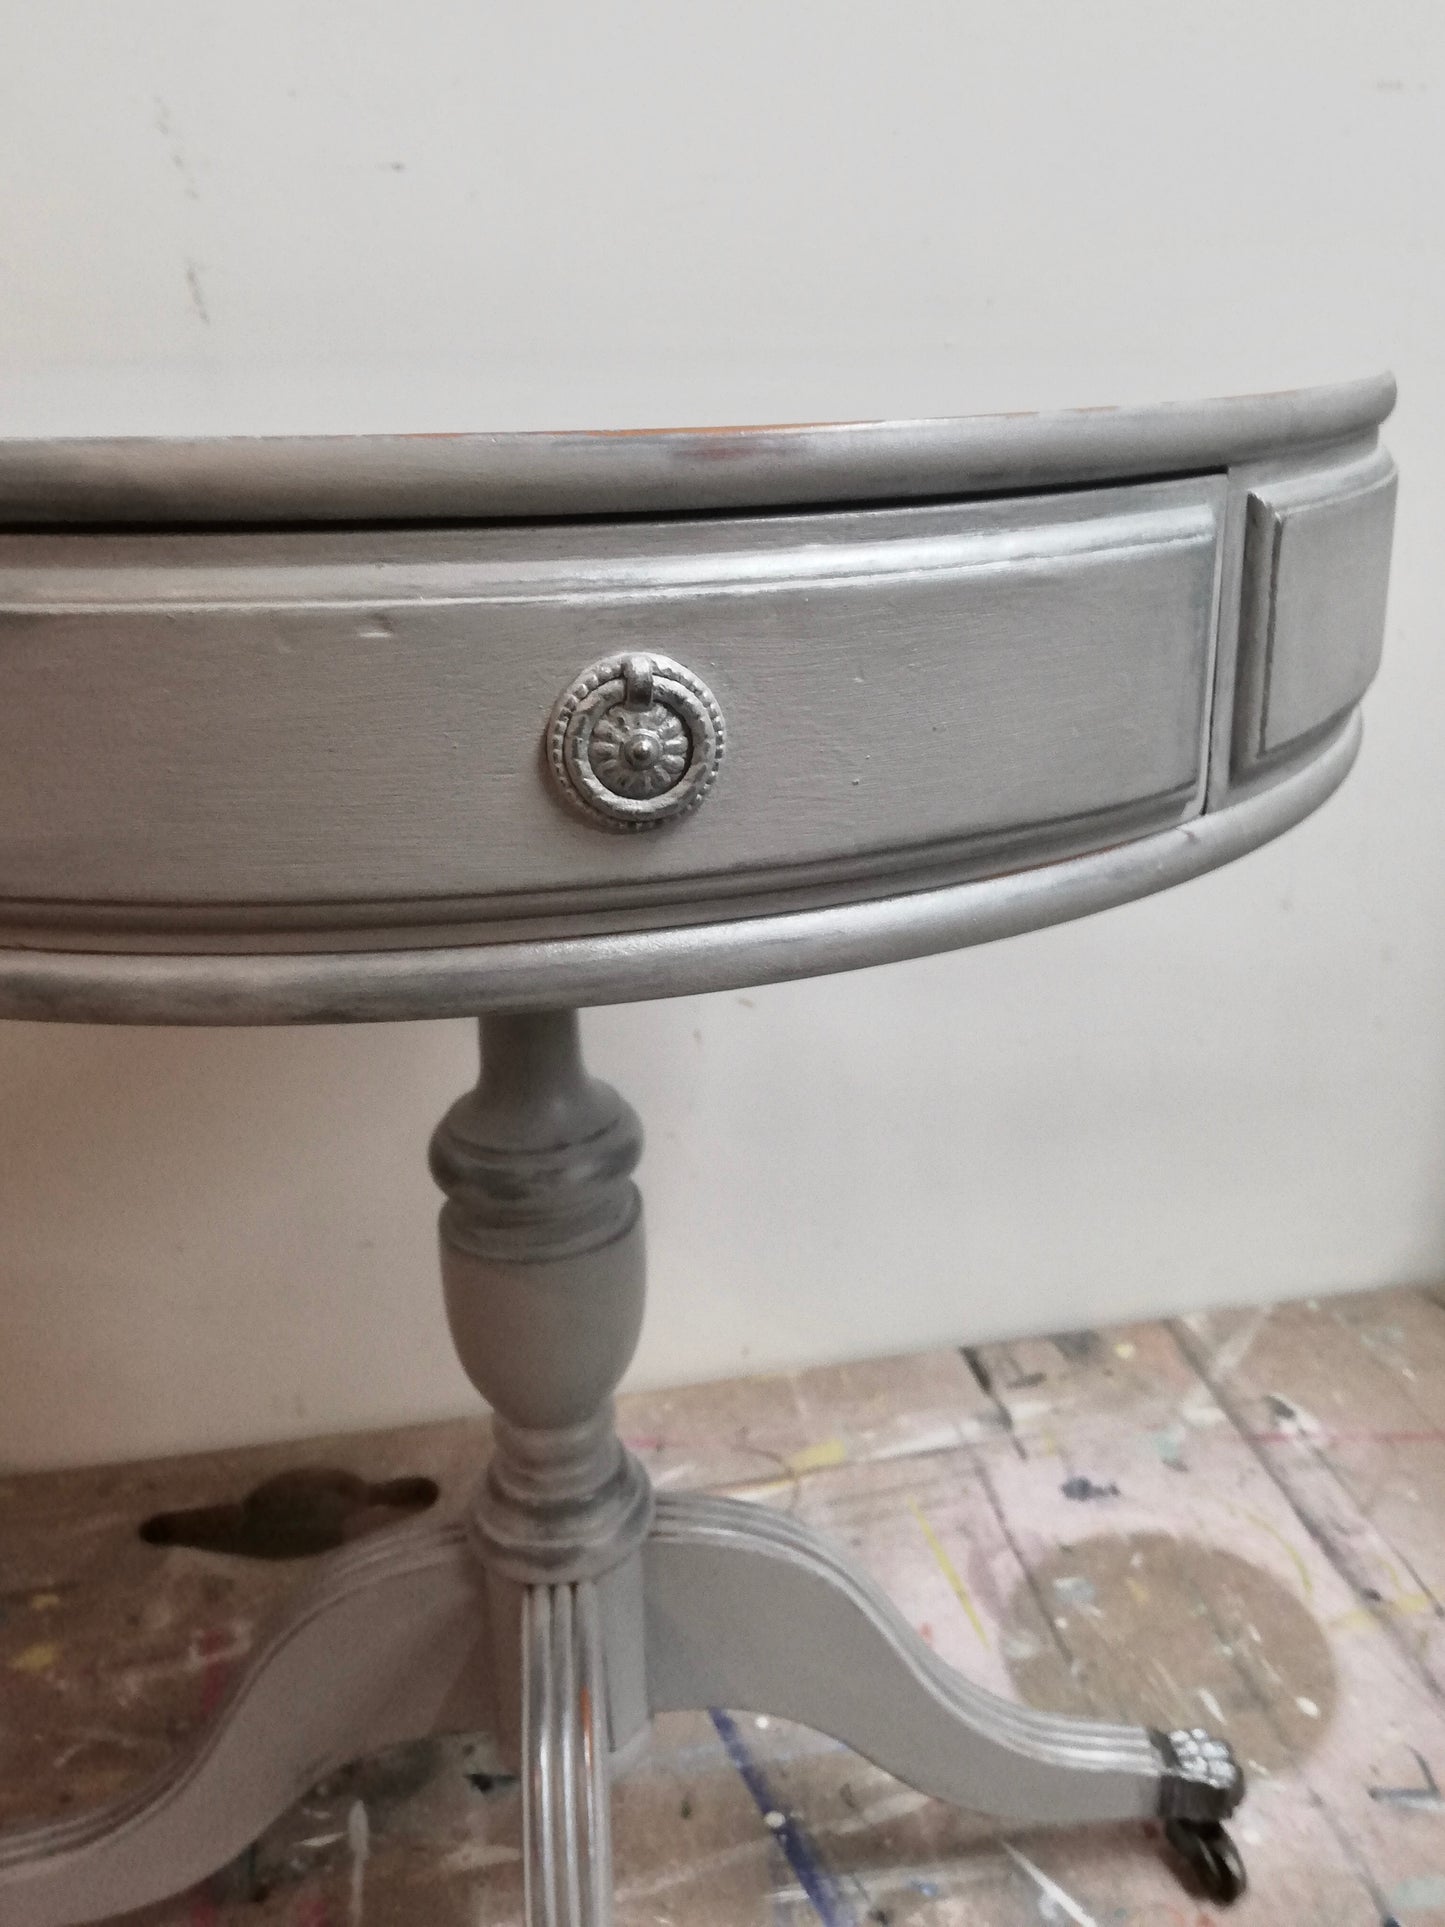 Commission for Linda painted drum table